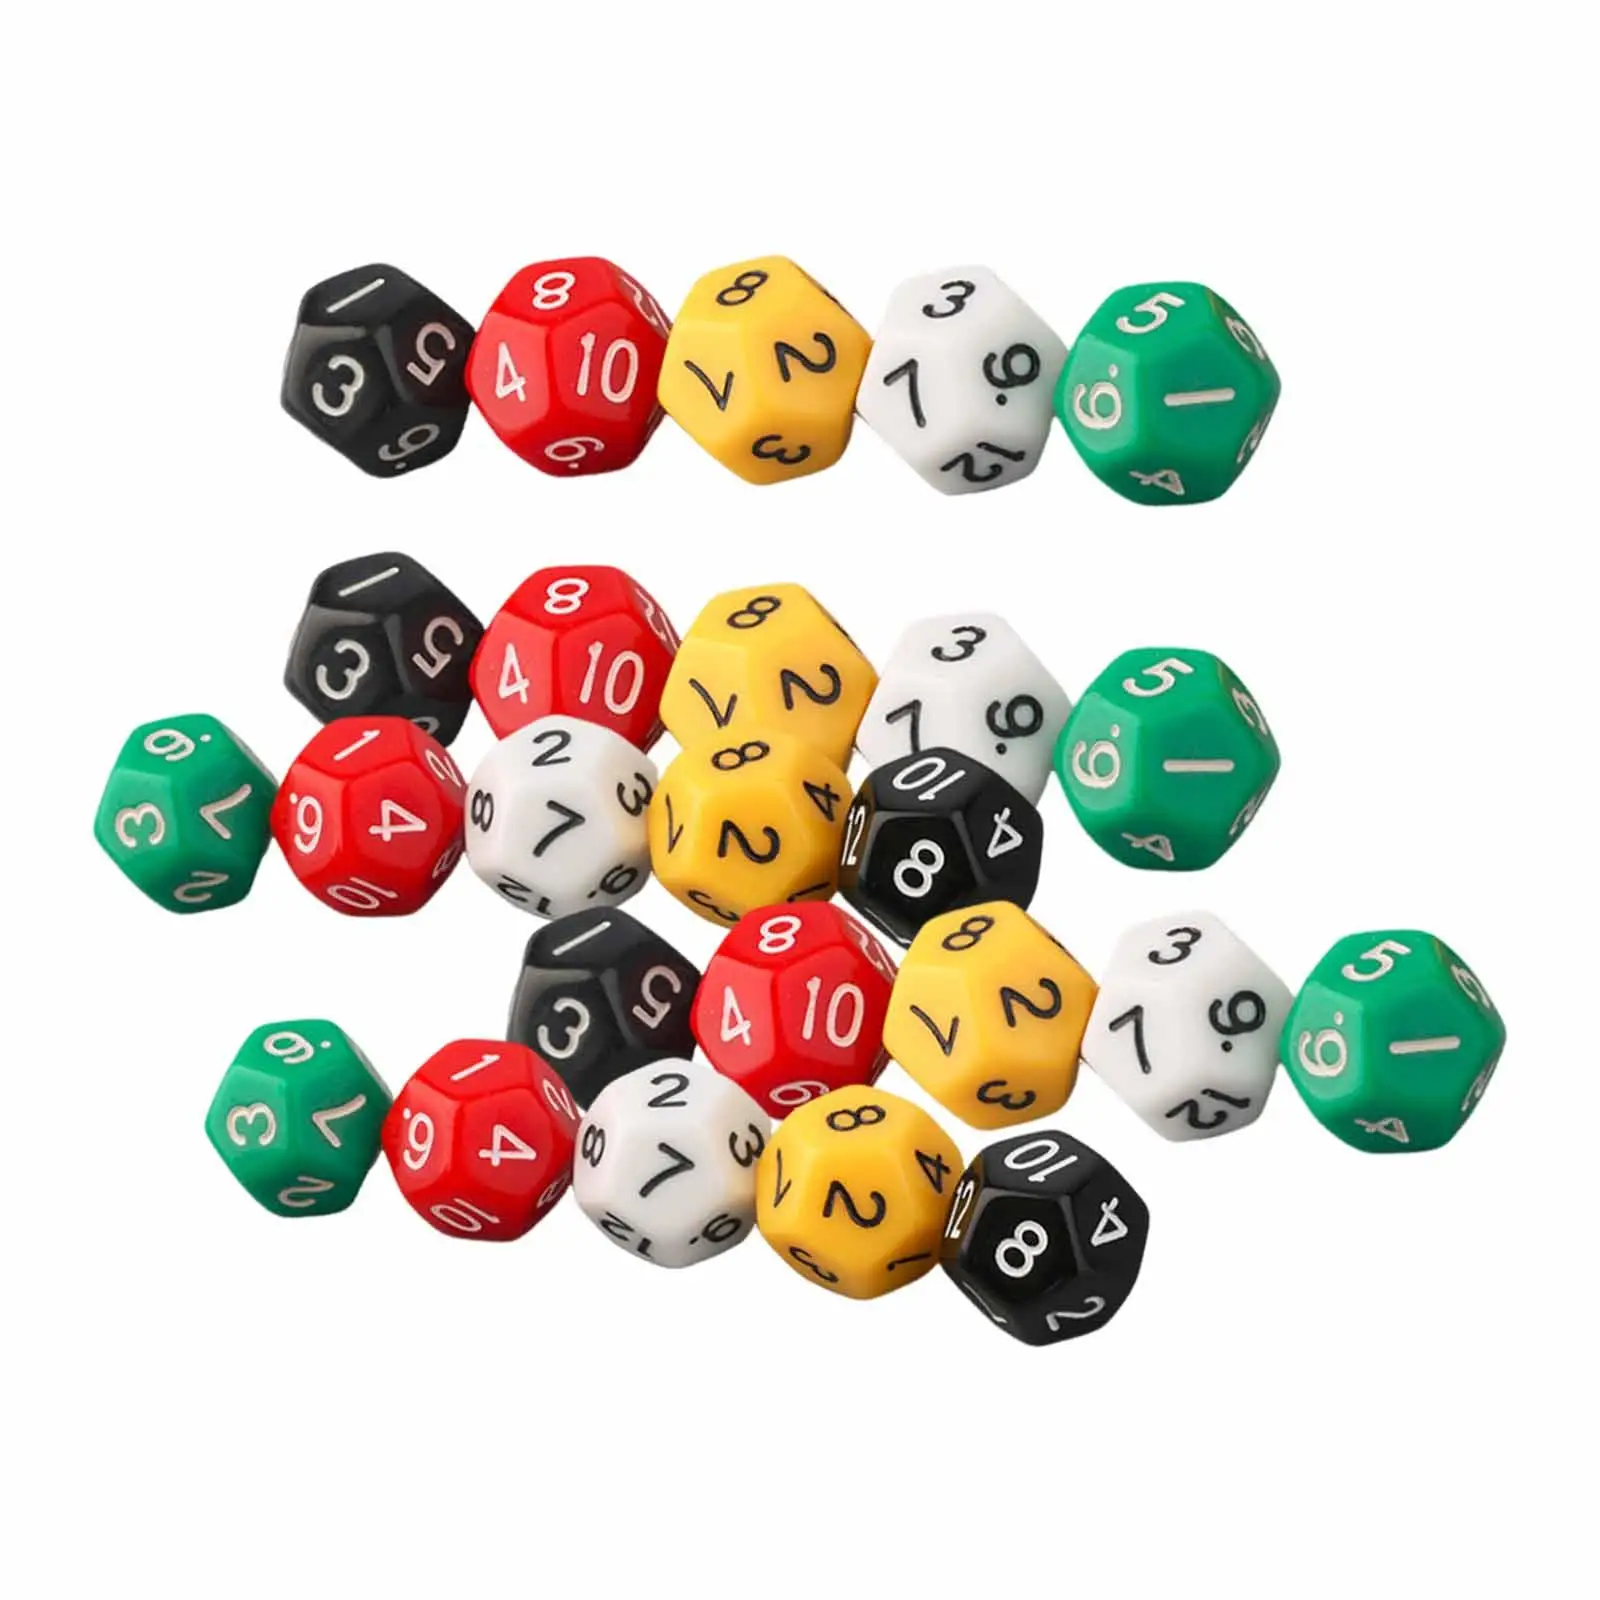 25x Polyhedral Dice Tabletop Game Gift Family Gatherings Multisided Dice